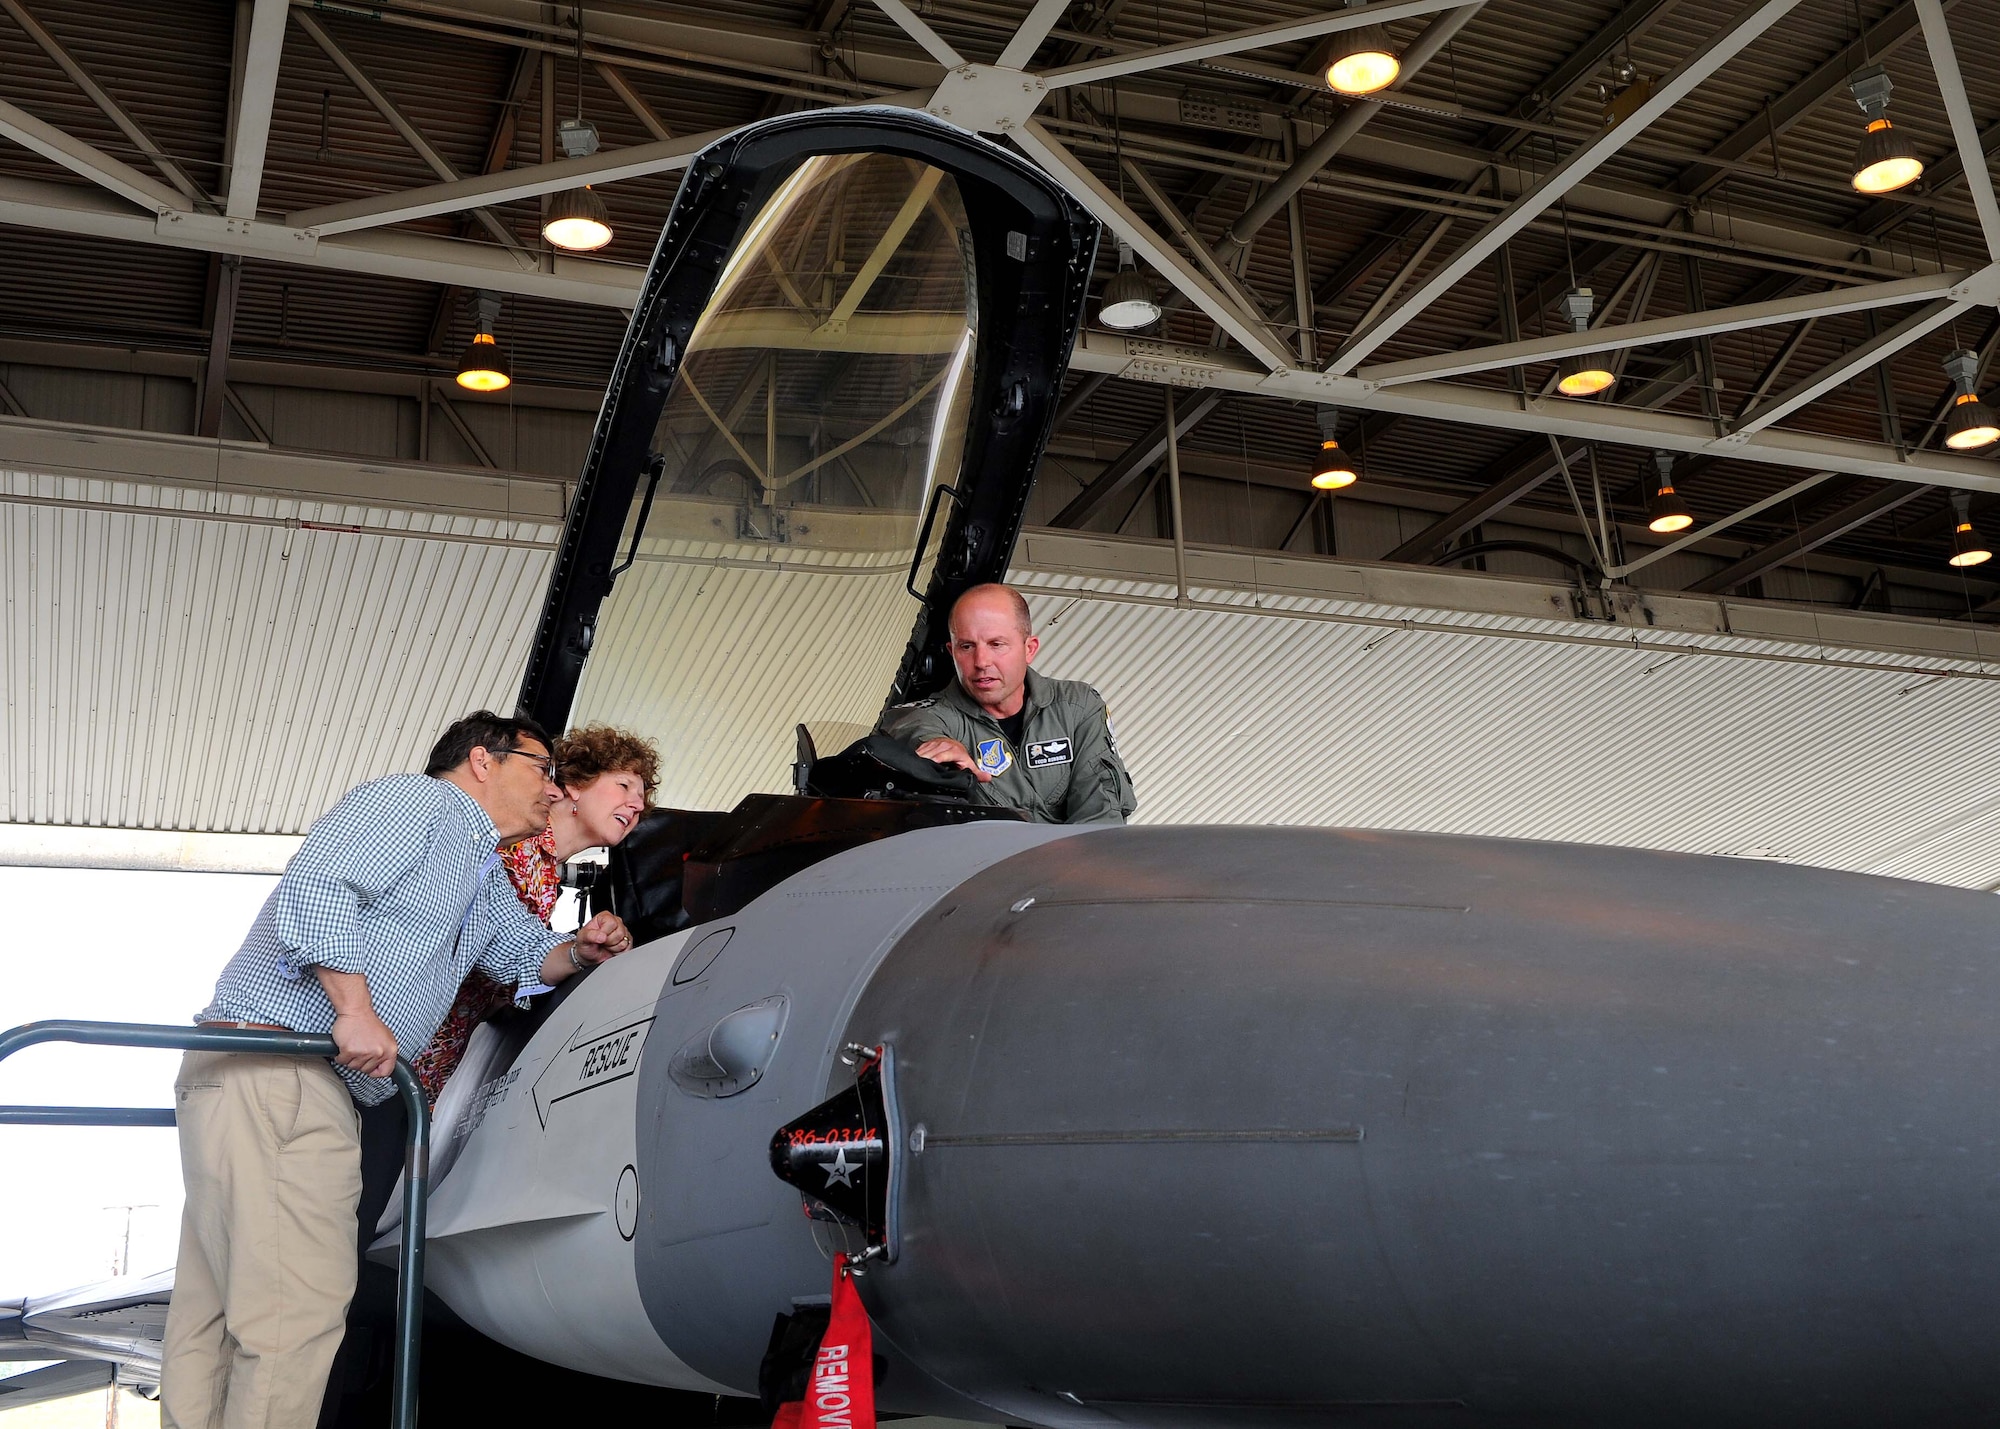 U.S. Air Force Col. Todd Robbins, the 354th Fighter Wing vice commander, explains features and functions in the F-16 Fighting Falcon cockpit to Congressman Gus Bilirakis and Congresswoman Susan Brooks July 7, 2017, on Eielson Air Force Base, Alaska. Seven House Committee of Energy and Commerce members visited the Arctic Region to learn about the energy resources and capabilities of the area. (U.S. Air Force photo by Staff Sgt. Jerilyn Quintanilla)